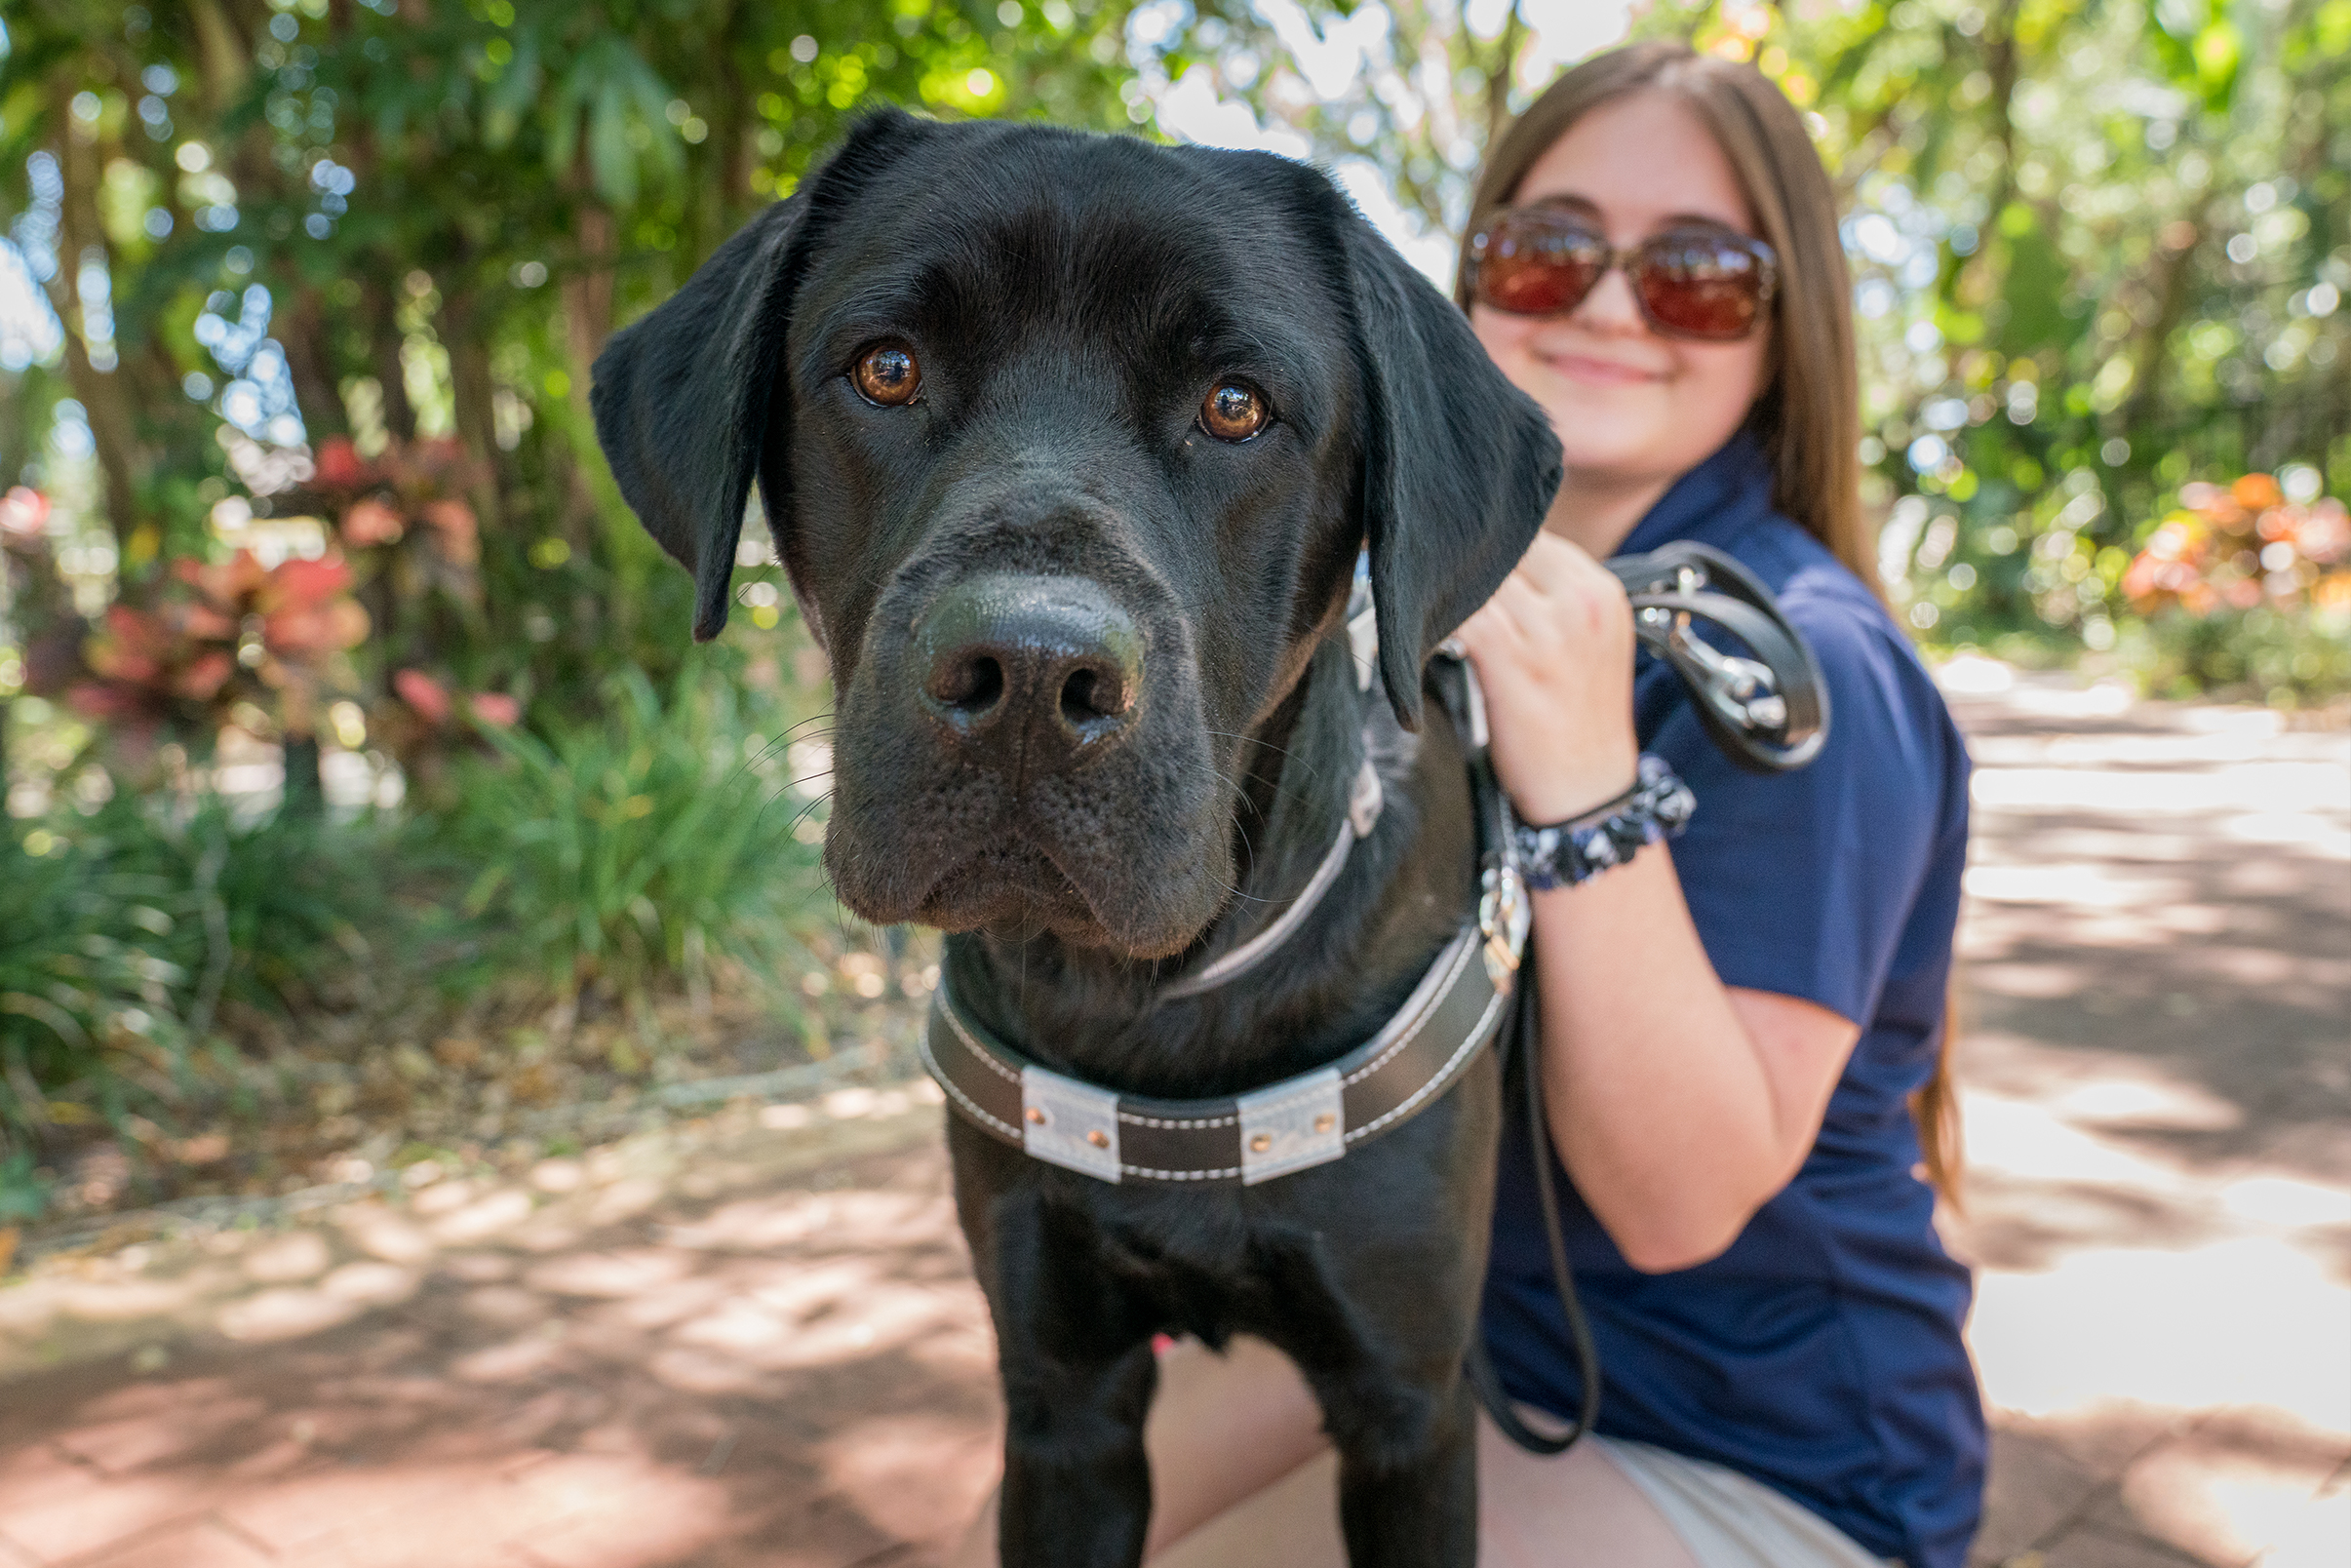 Black lab in harness stands in front of the camera and handler smiles in the distance